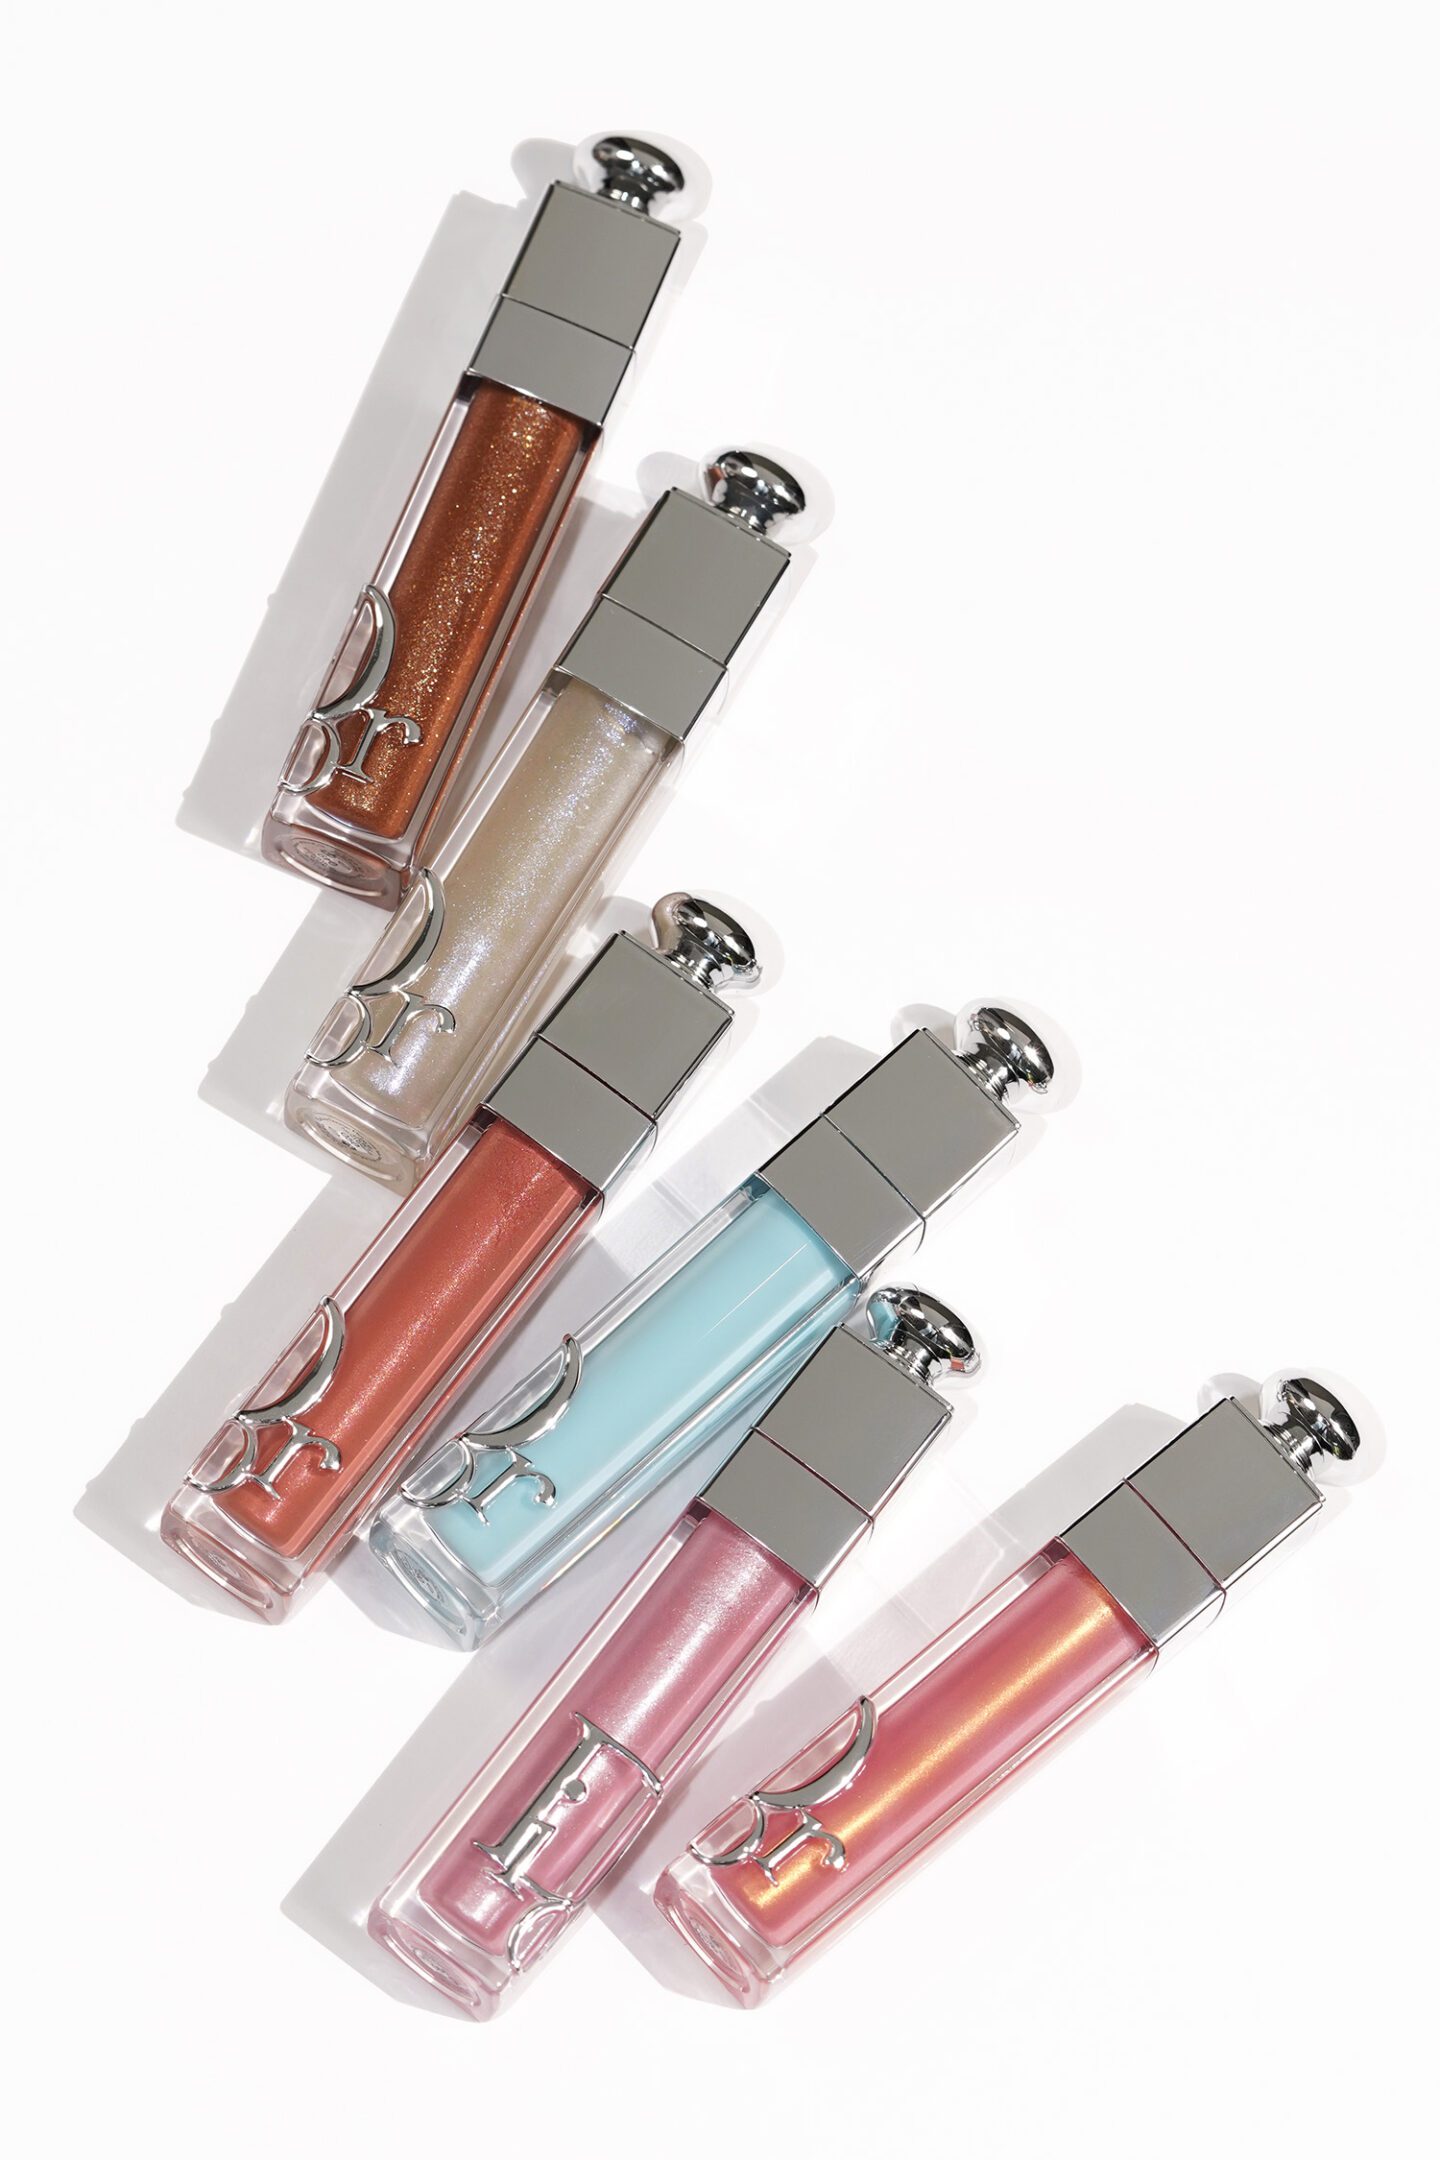 Dior Addict Lip Maximizers Icy Blue, Shimmer Candy and Shimmer Rose Gold